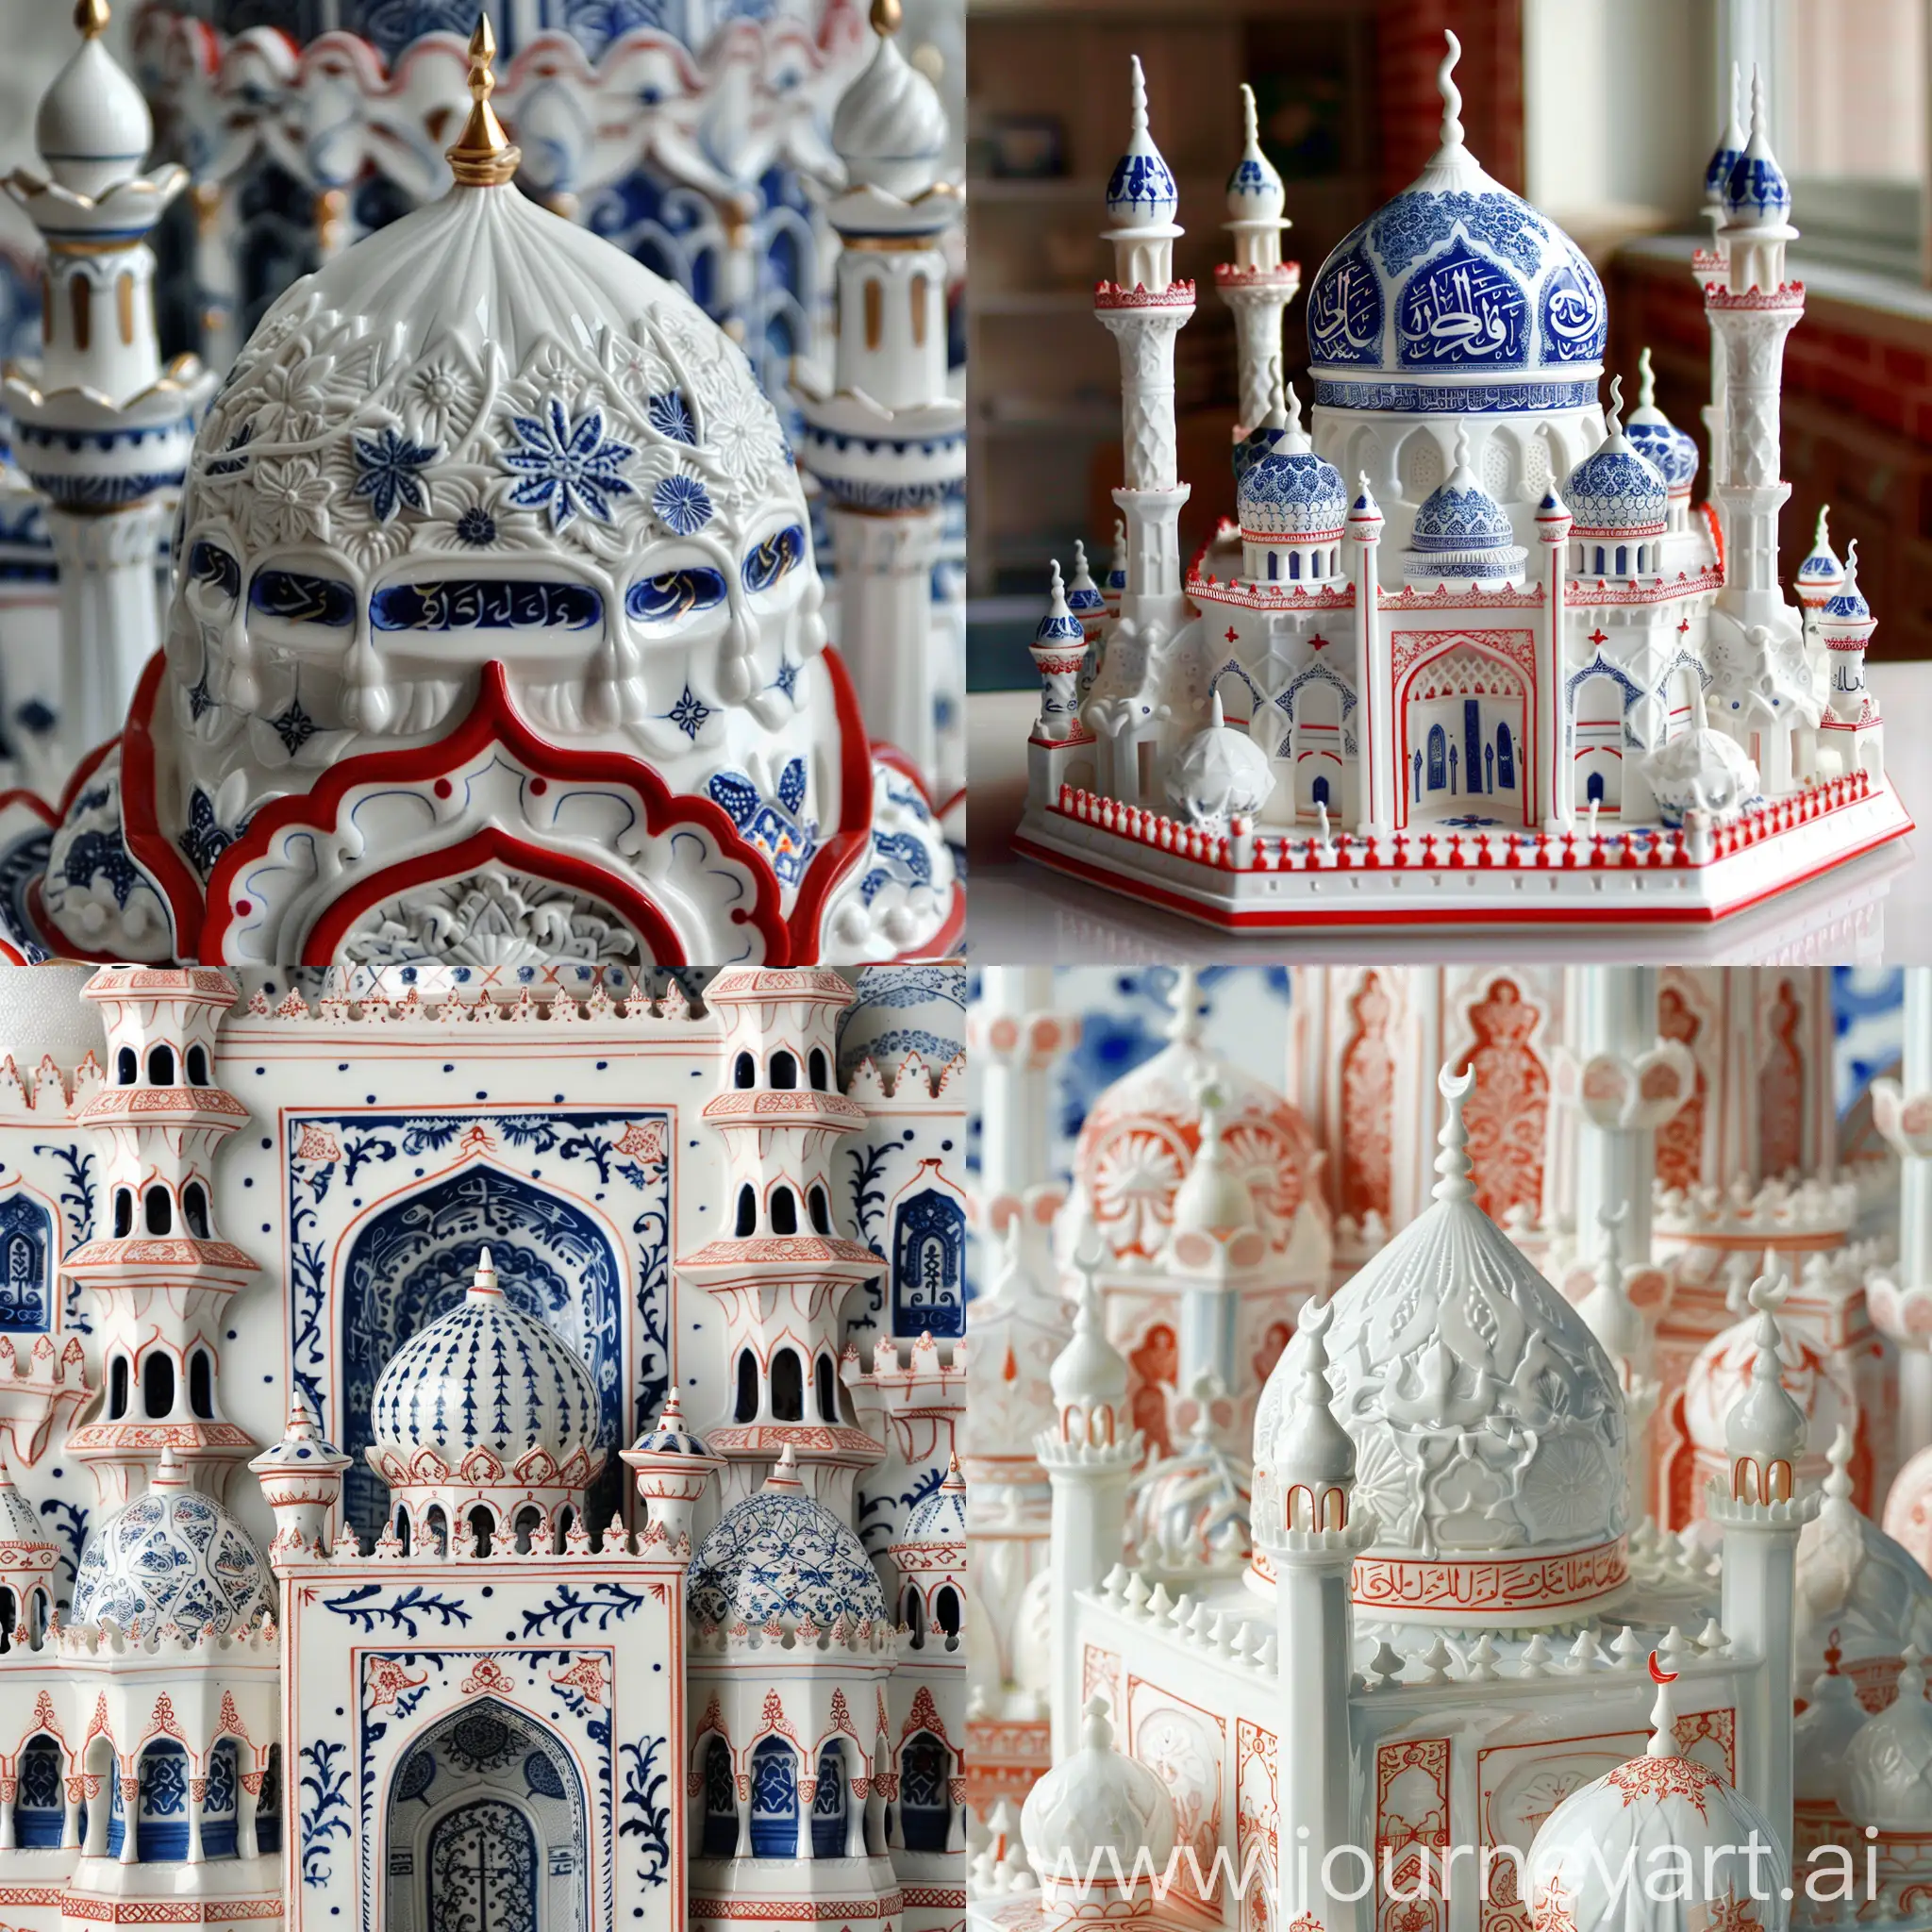 Porcelain mosque with islamic art carvings, in China, white red blue